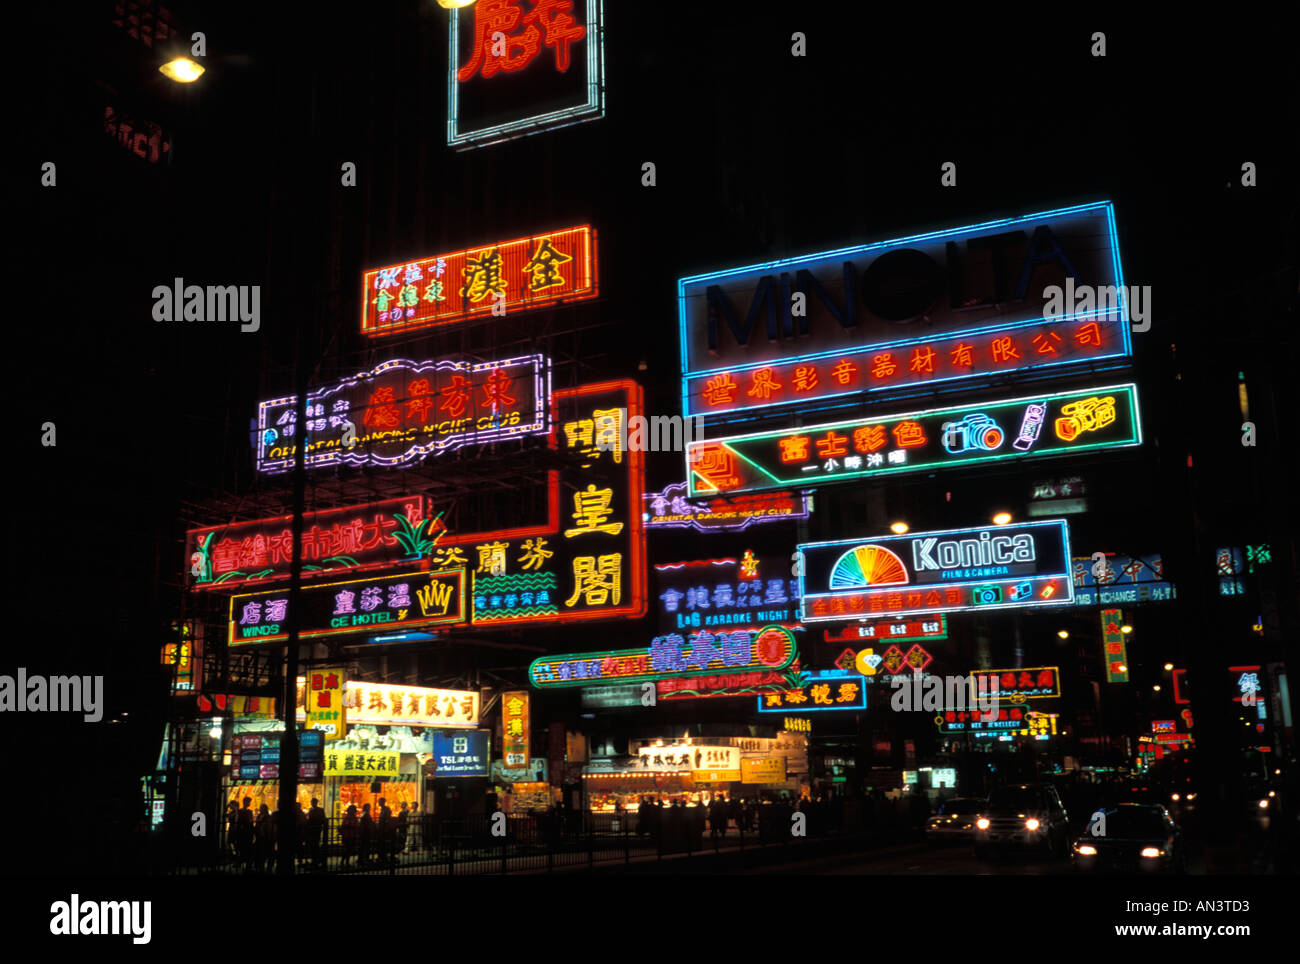 Hong Kong street scene lit up by neon signs at night time Stock Photo